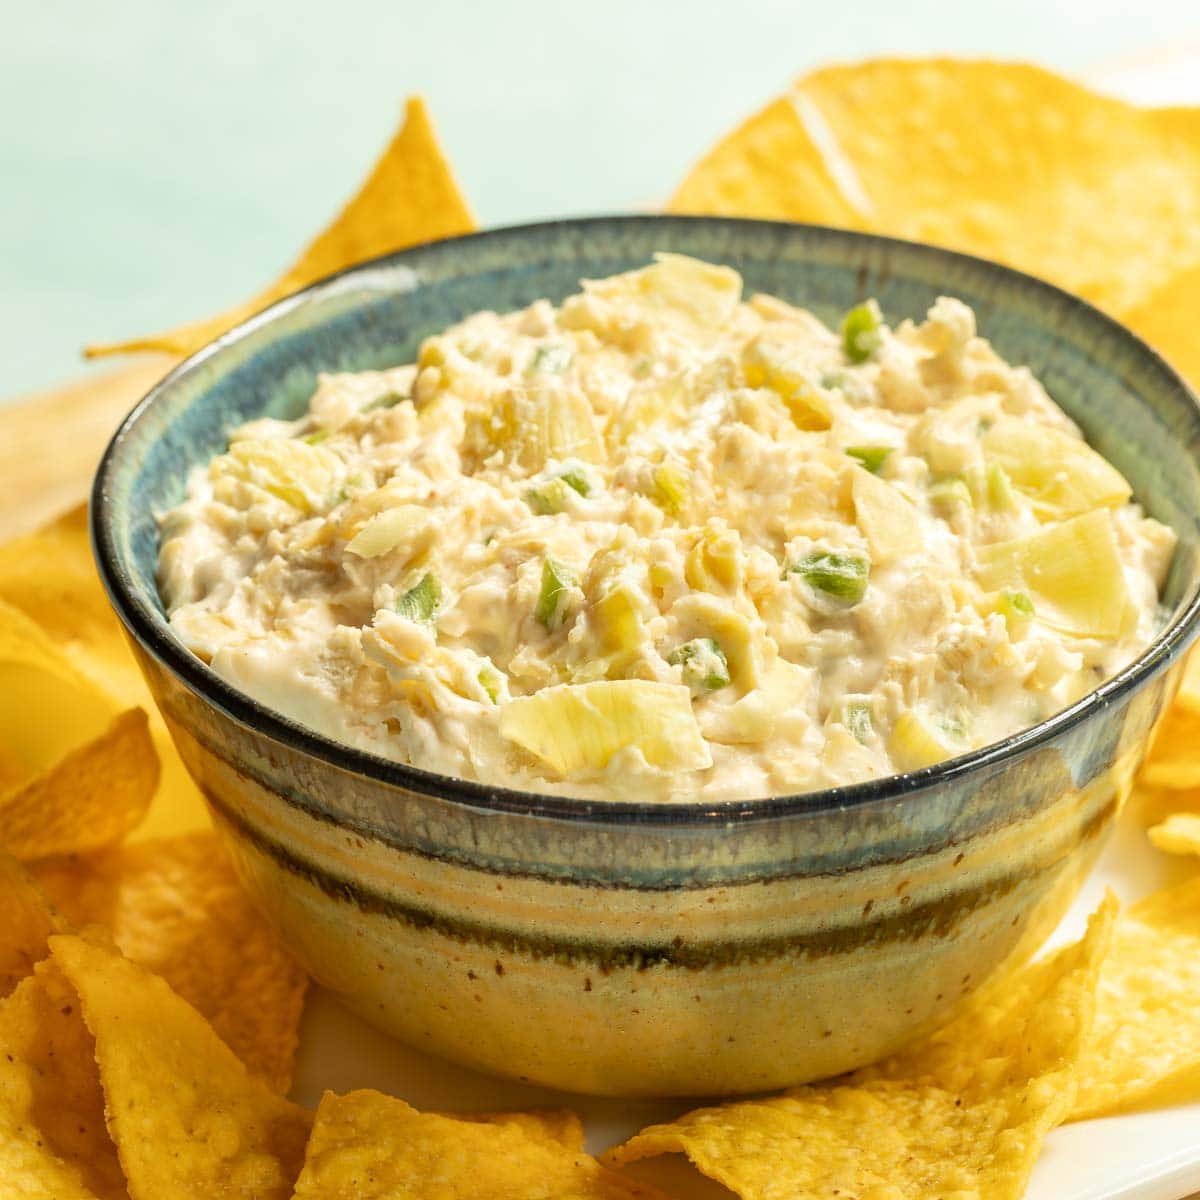 Blue striped bowl holding Jalapeno Artichoke Dip, surrounded by tortilla chips